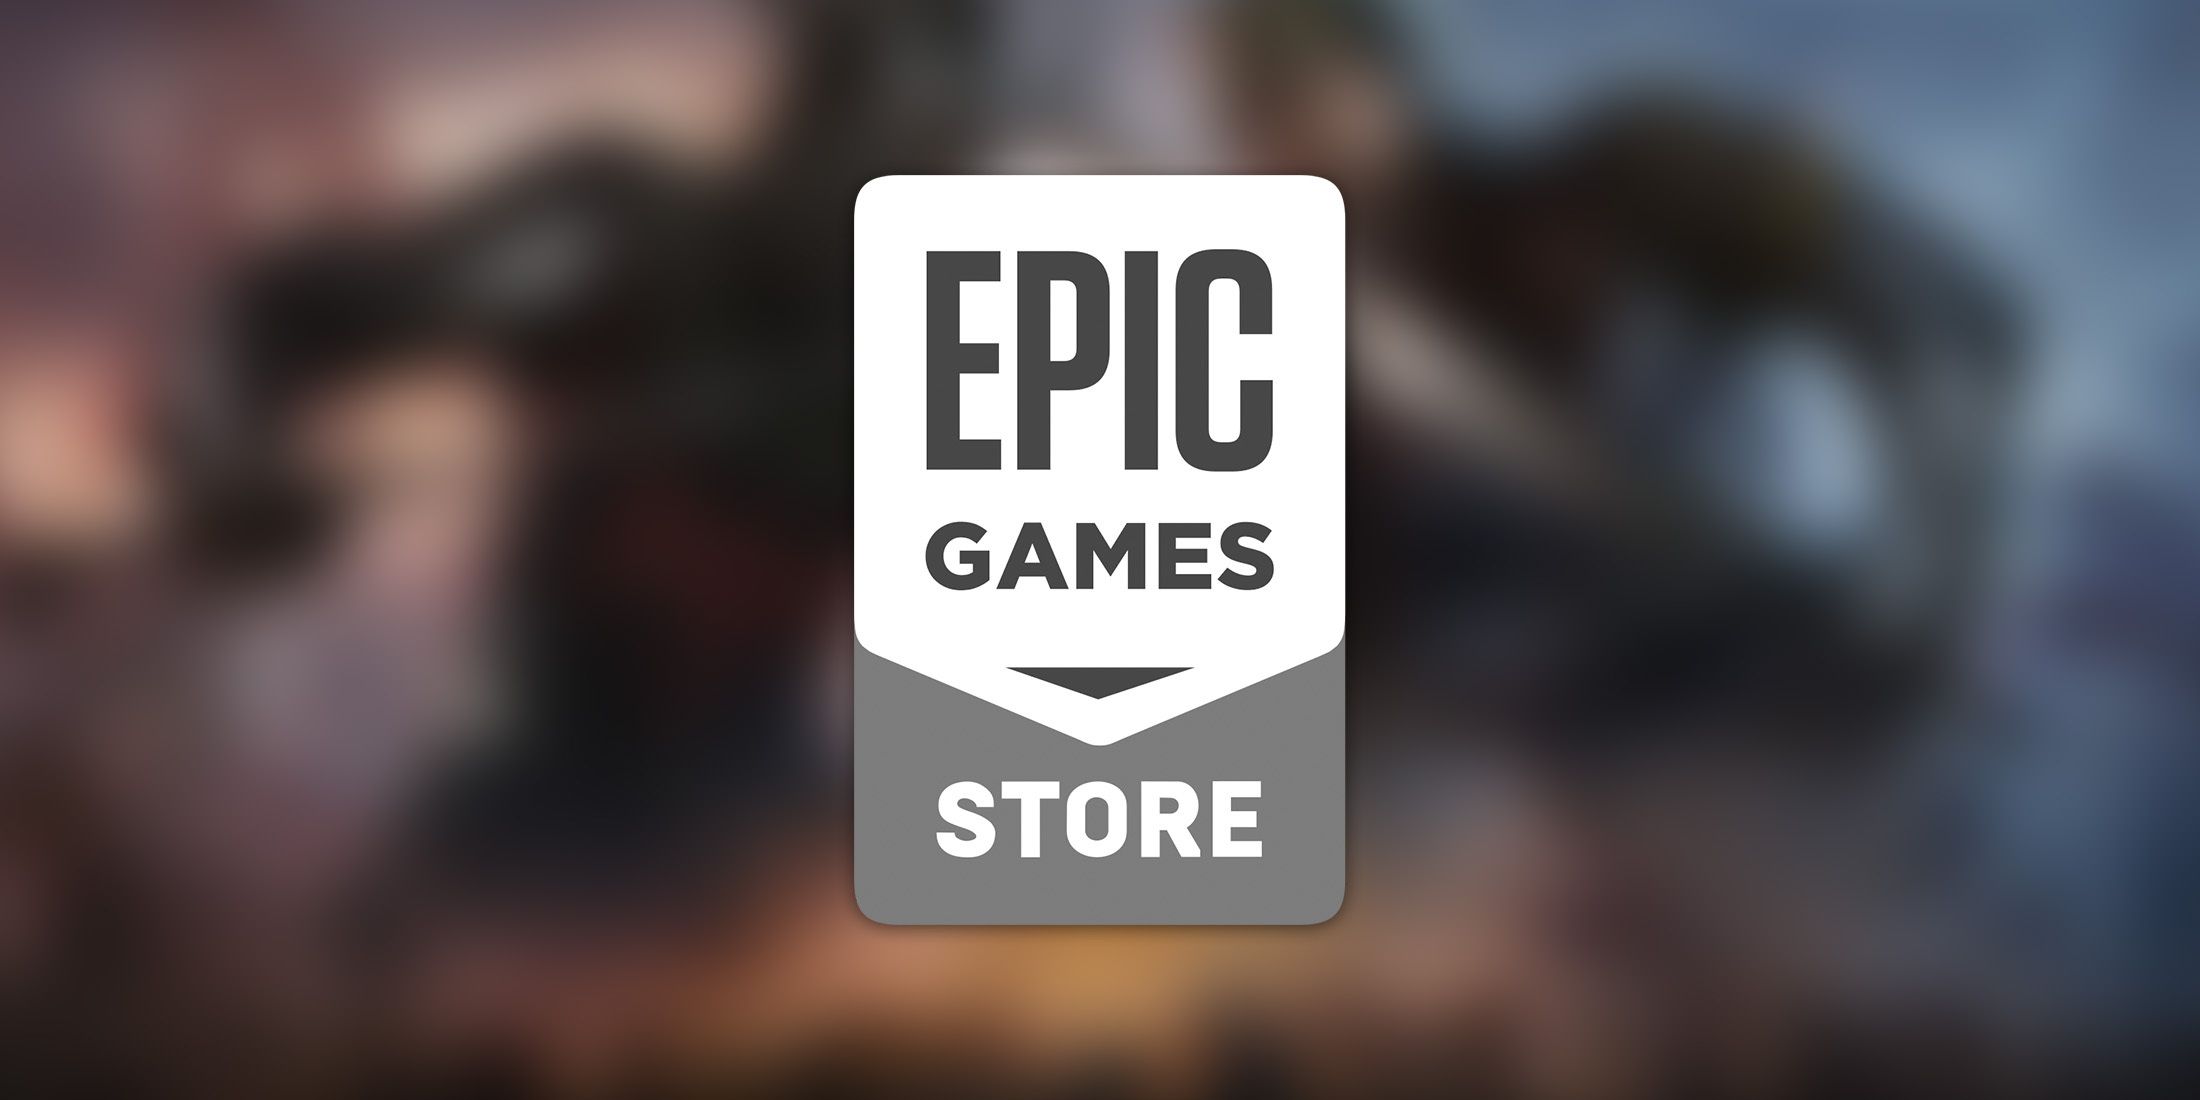 epic games store chivalry 2